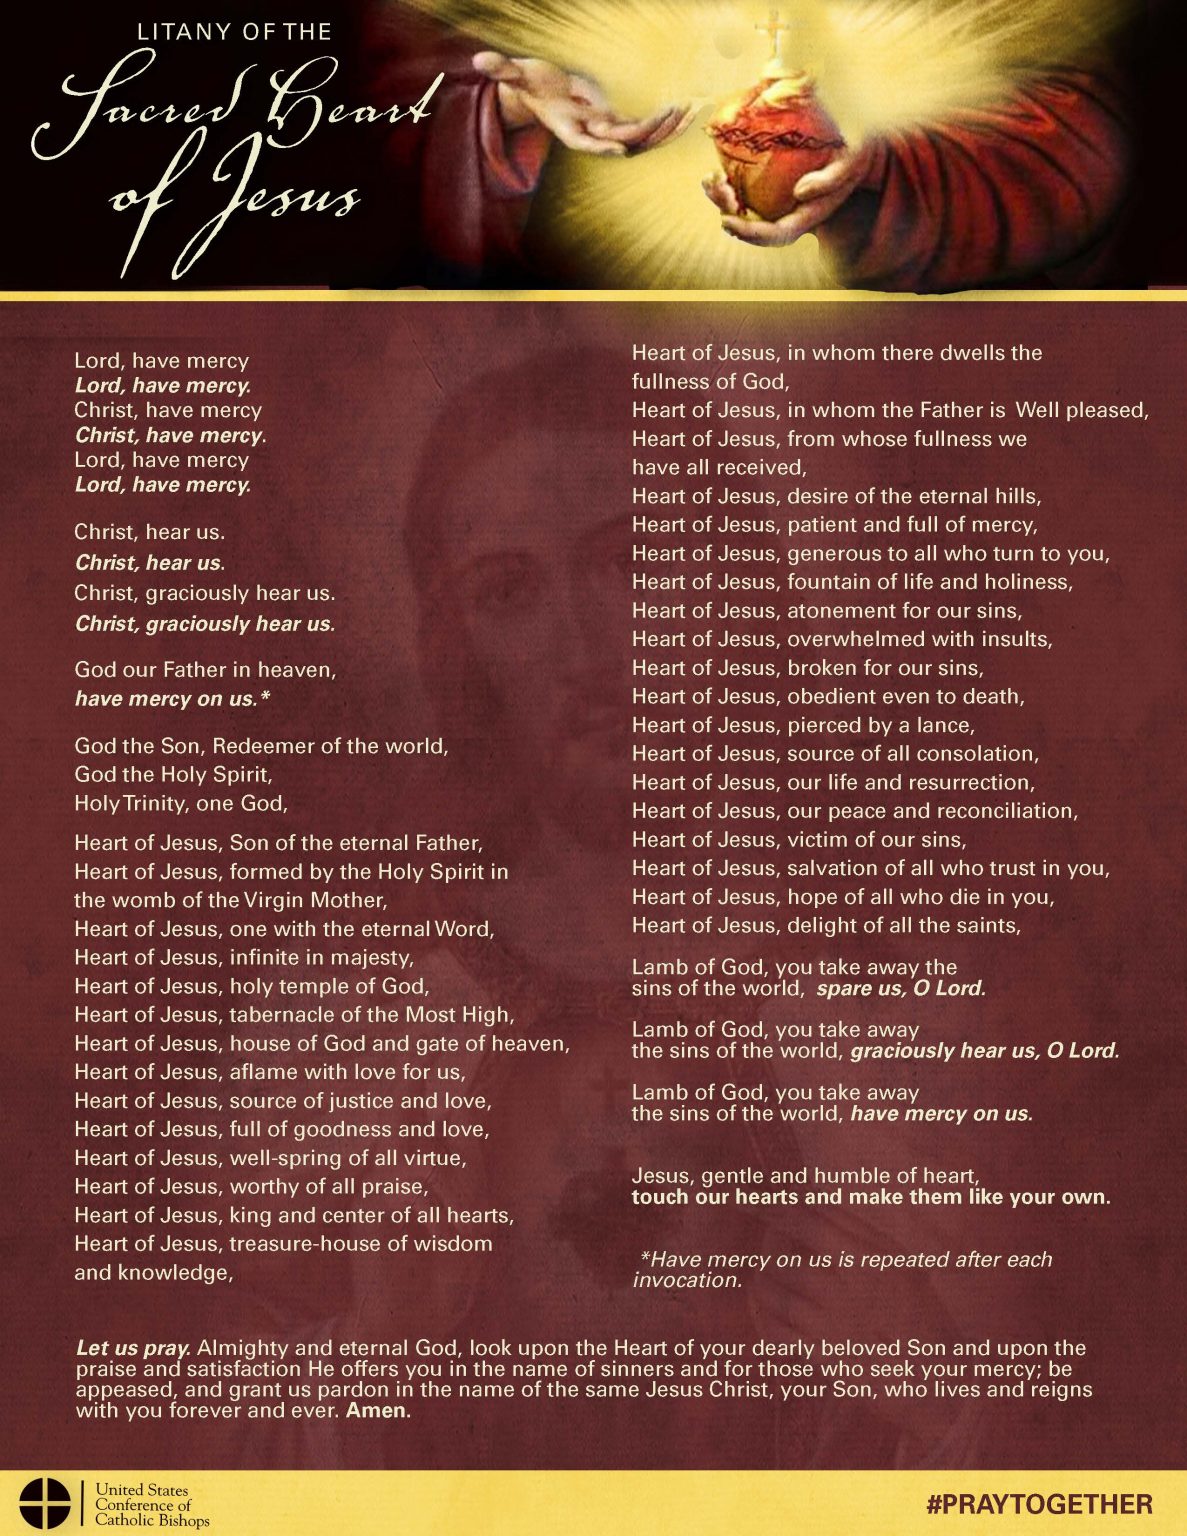 litany-of-the-sacred-heart-of-jesus-on-good-friday-our-lady-queen-of